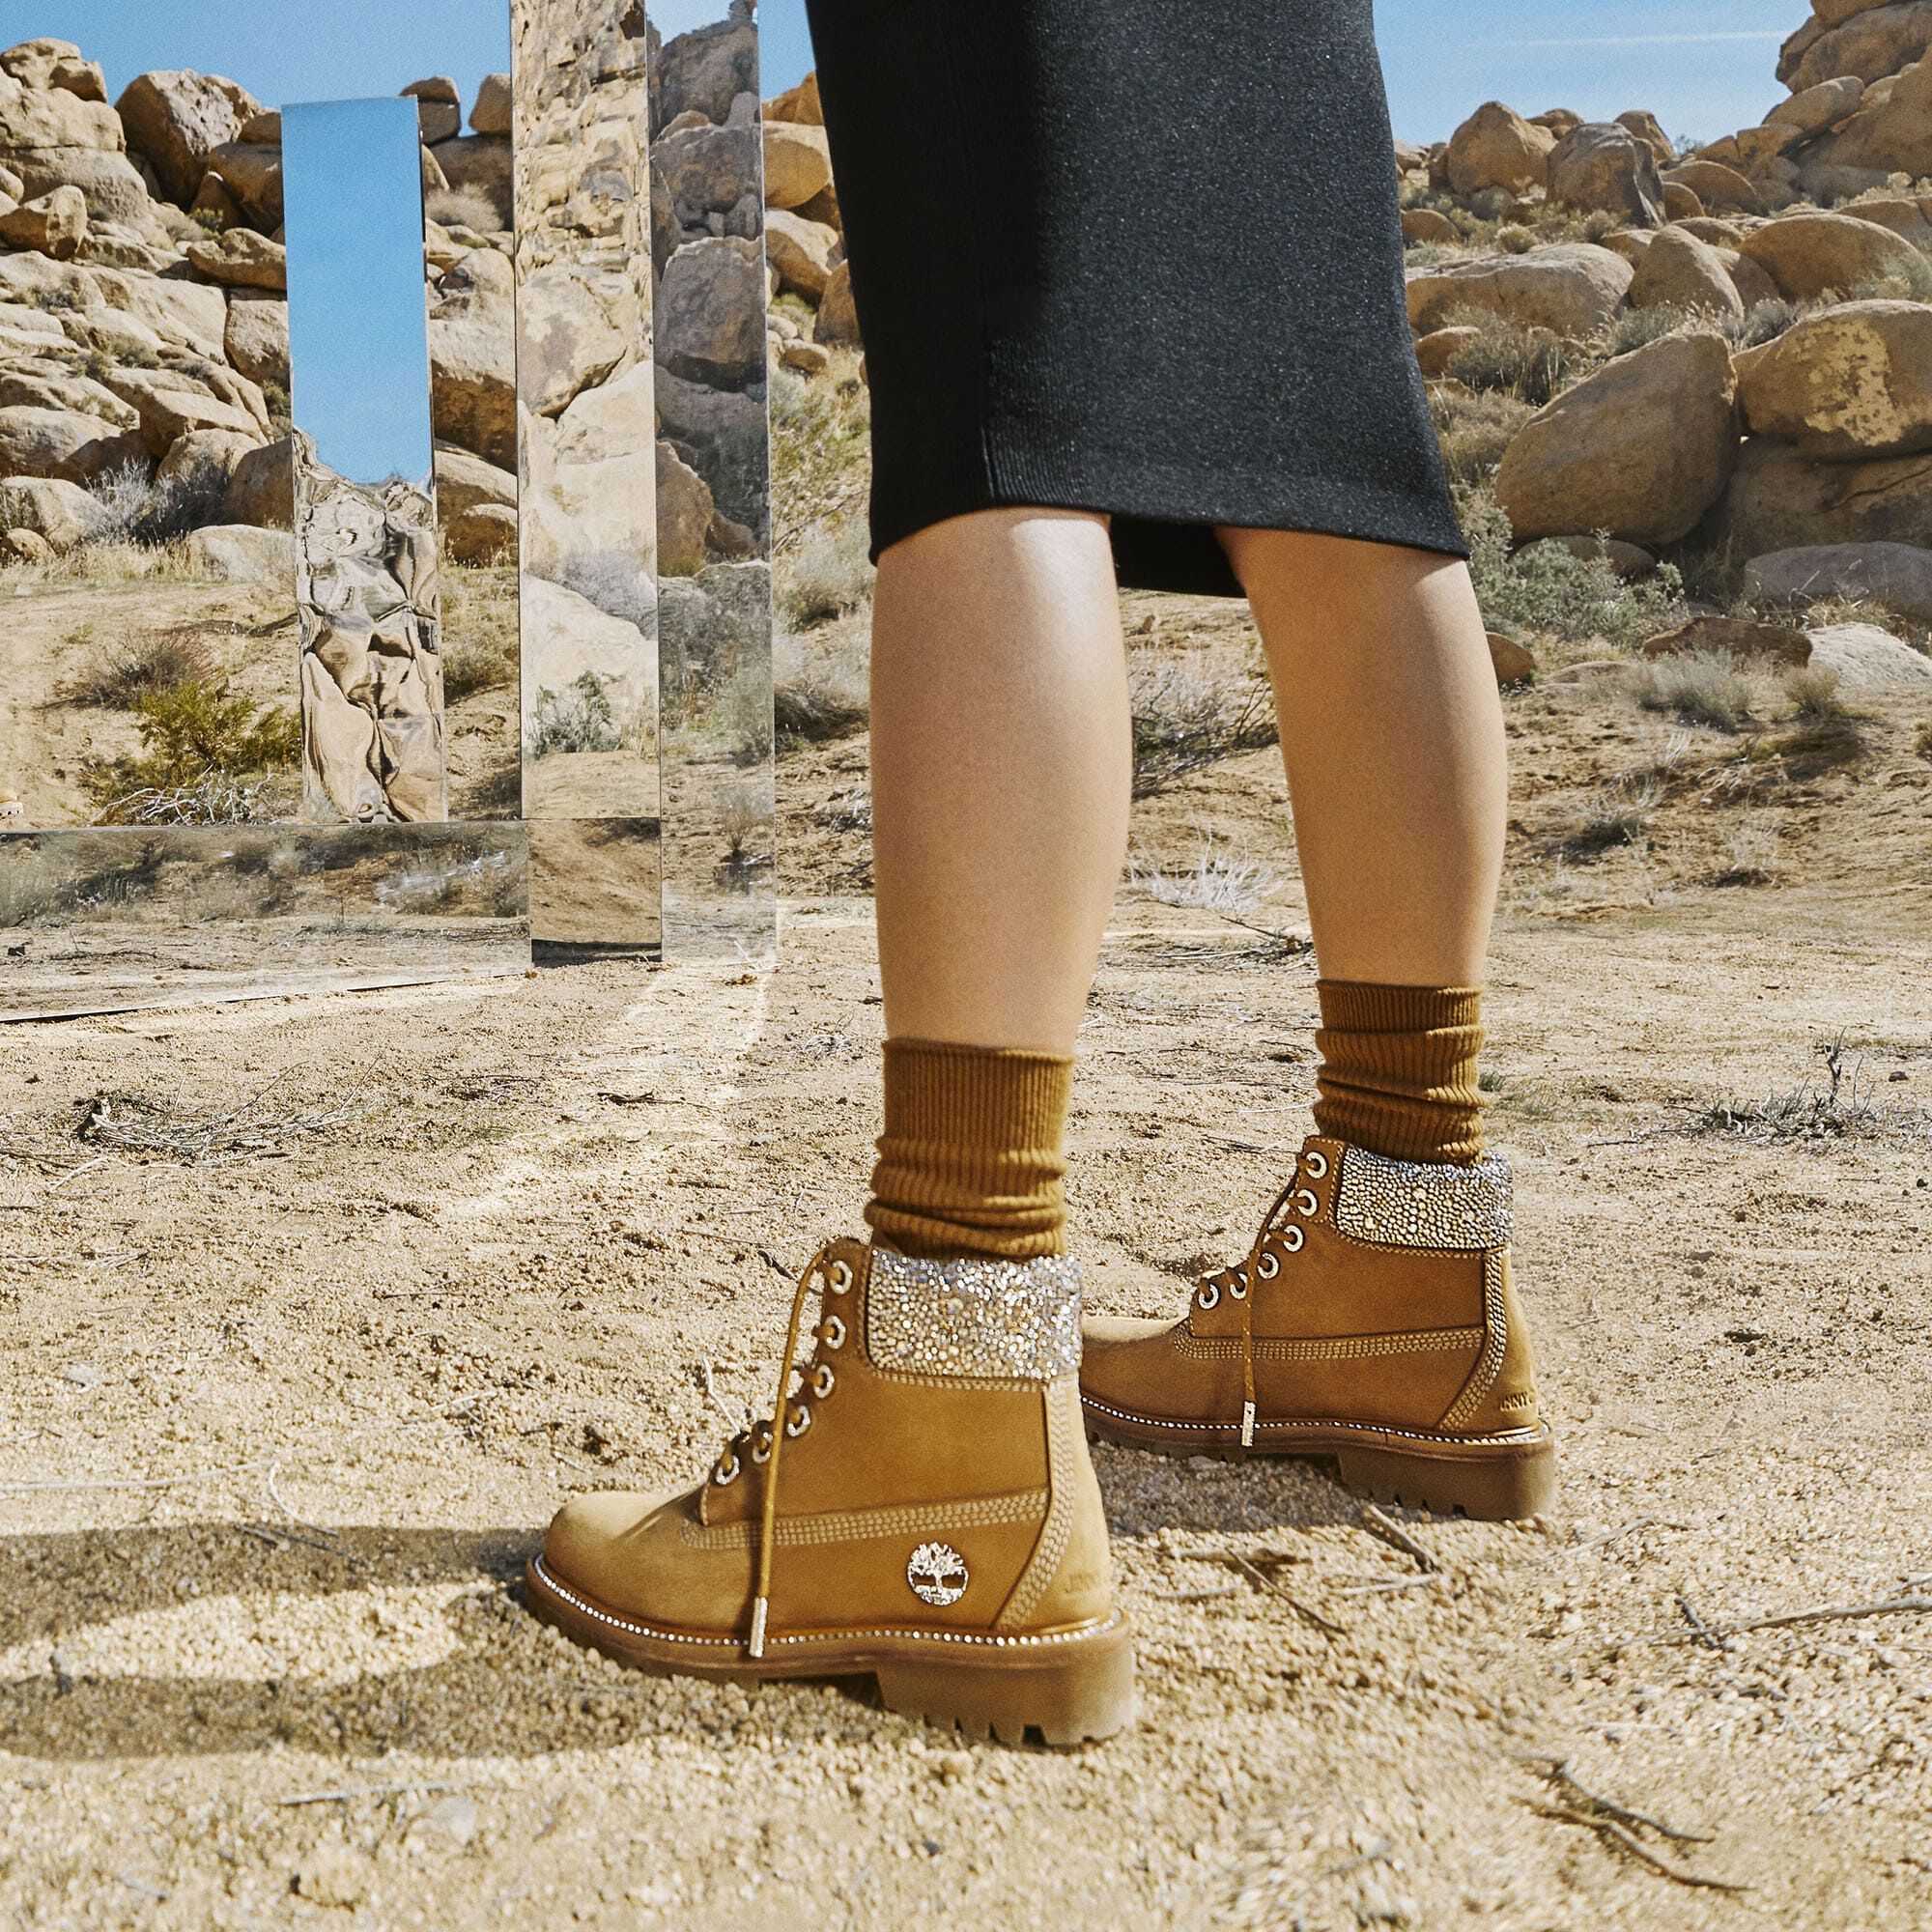 Jimmy Choo X Timberland Collaboration: A Match Made In Heaven | Harper